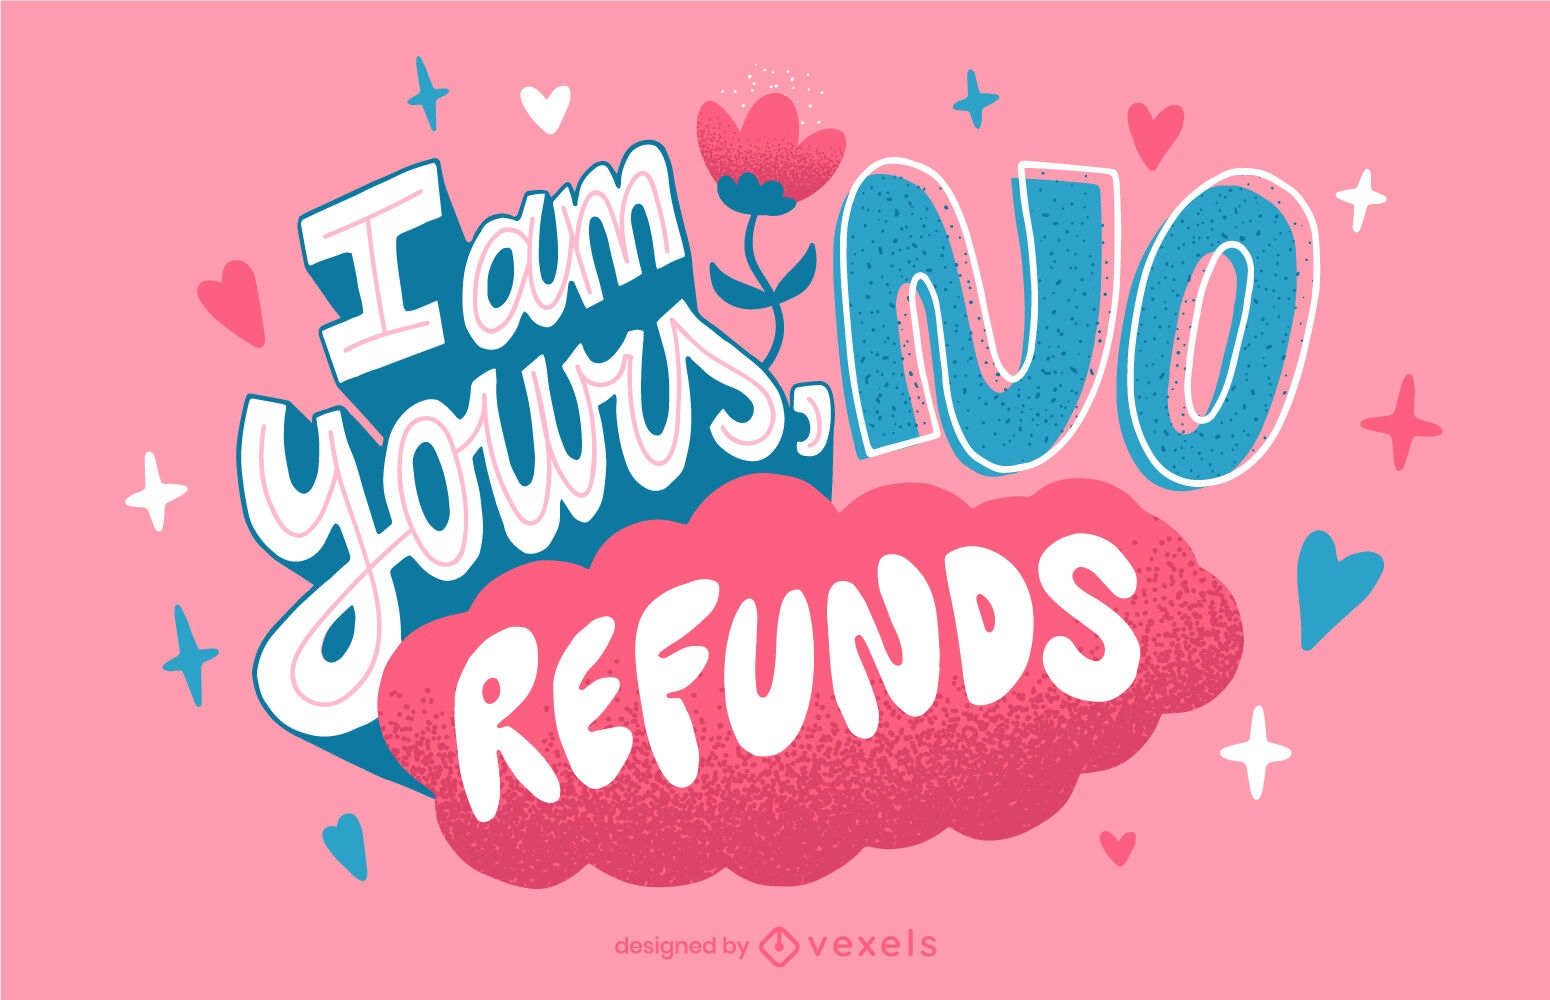 Cool valentine's day no refunds quote design